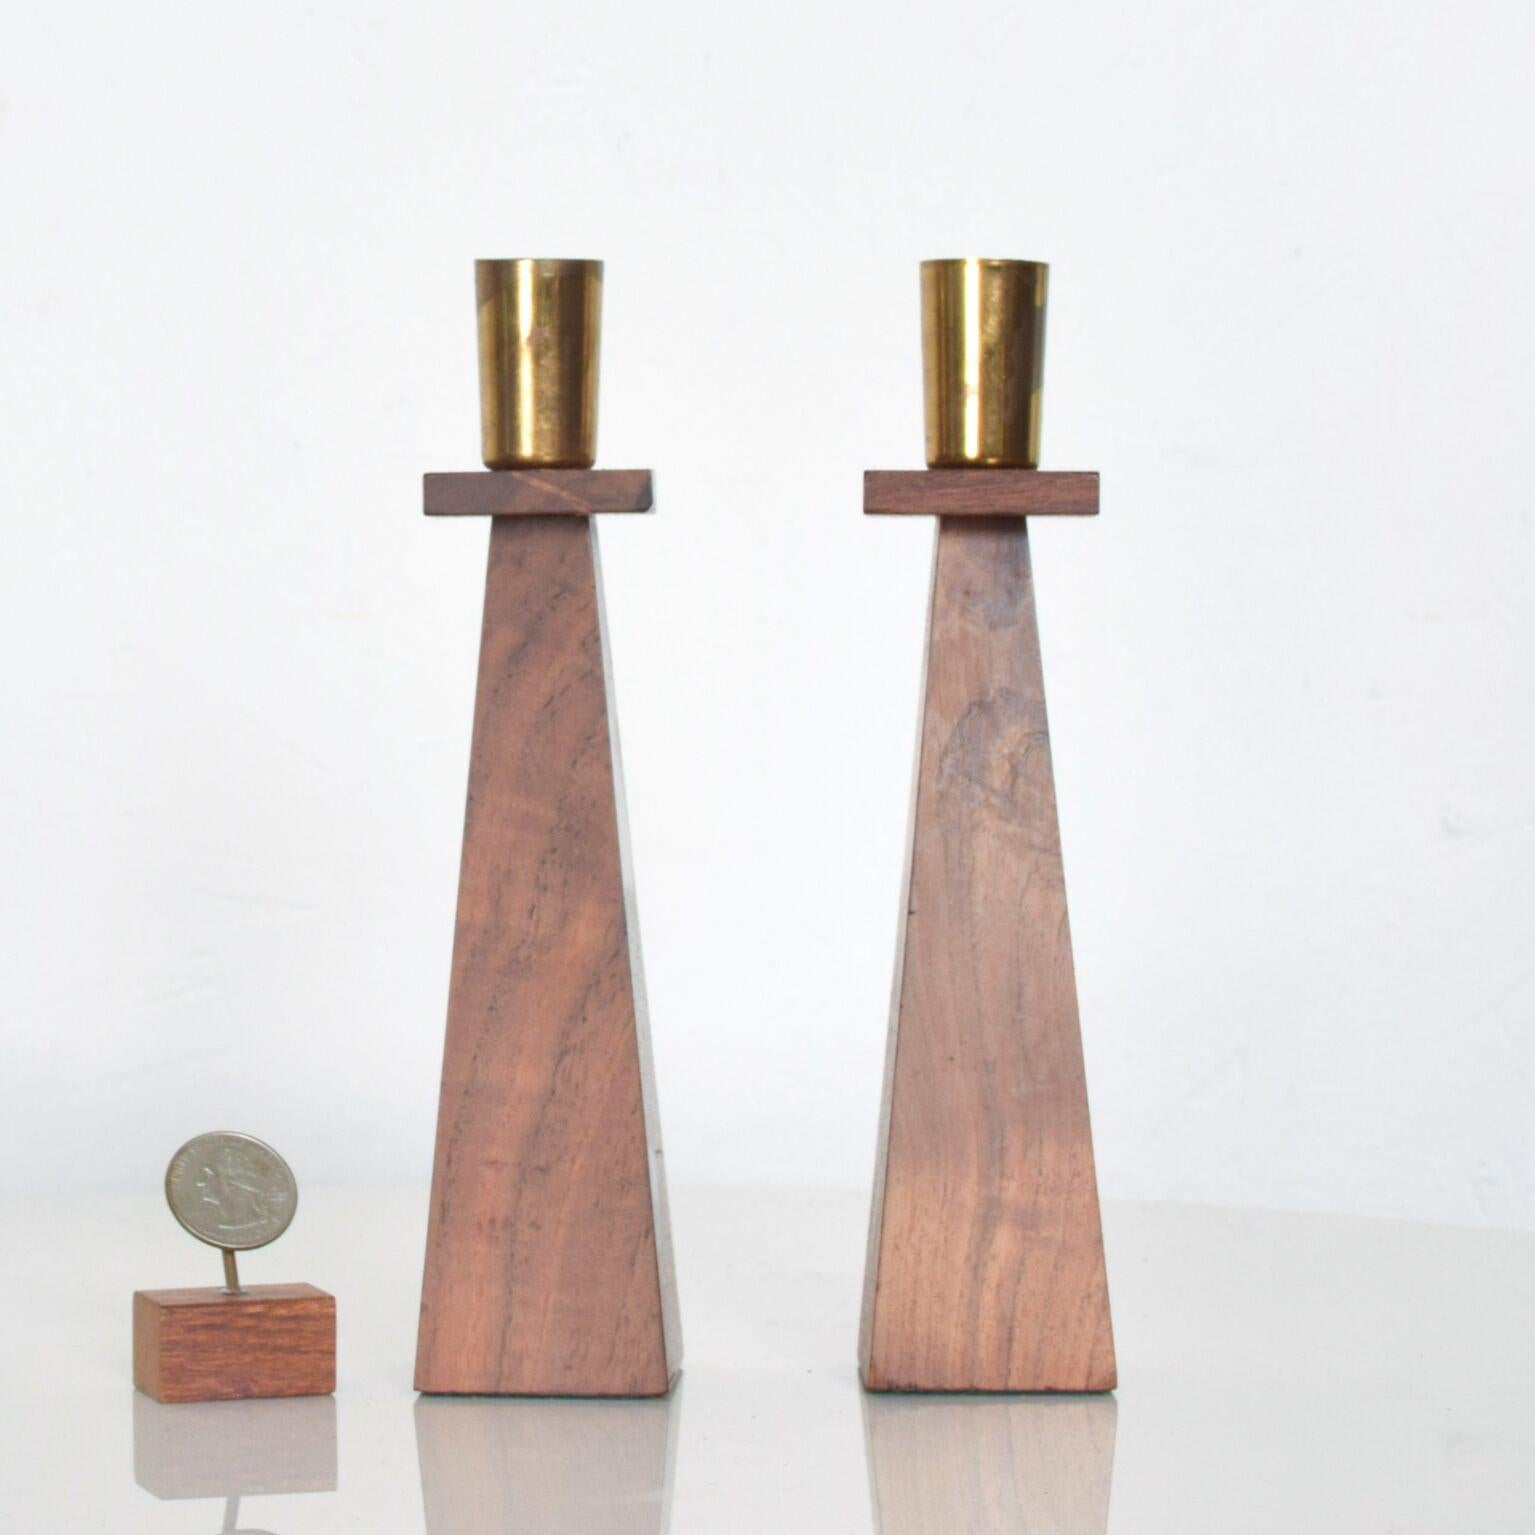 For your pleasure: Vintage Danish modern Kustom Kraft walnut wood and brass sculptural candlestick candle holders. This Kustom Kraft set is a lovely Mid-Century Modern design.

Dimensions: 8